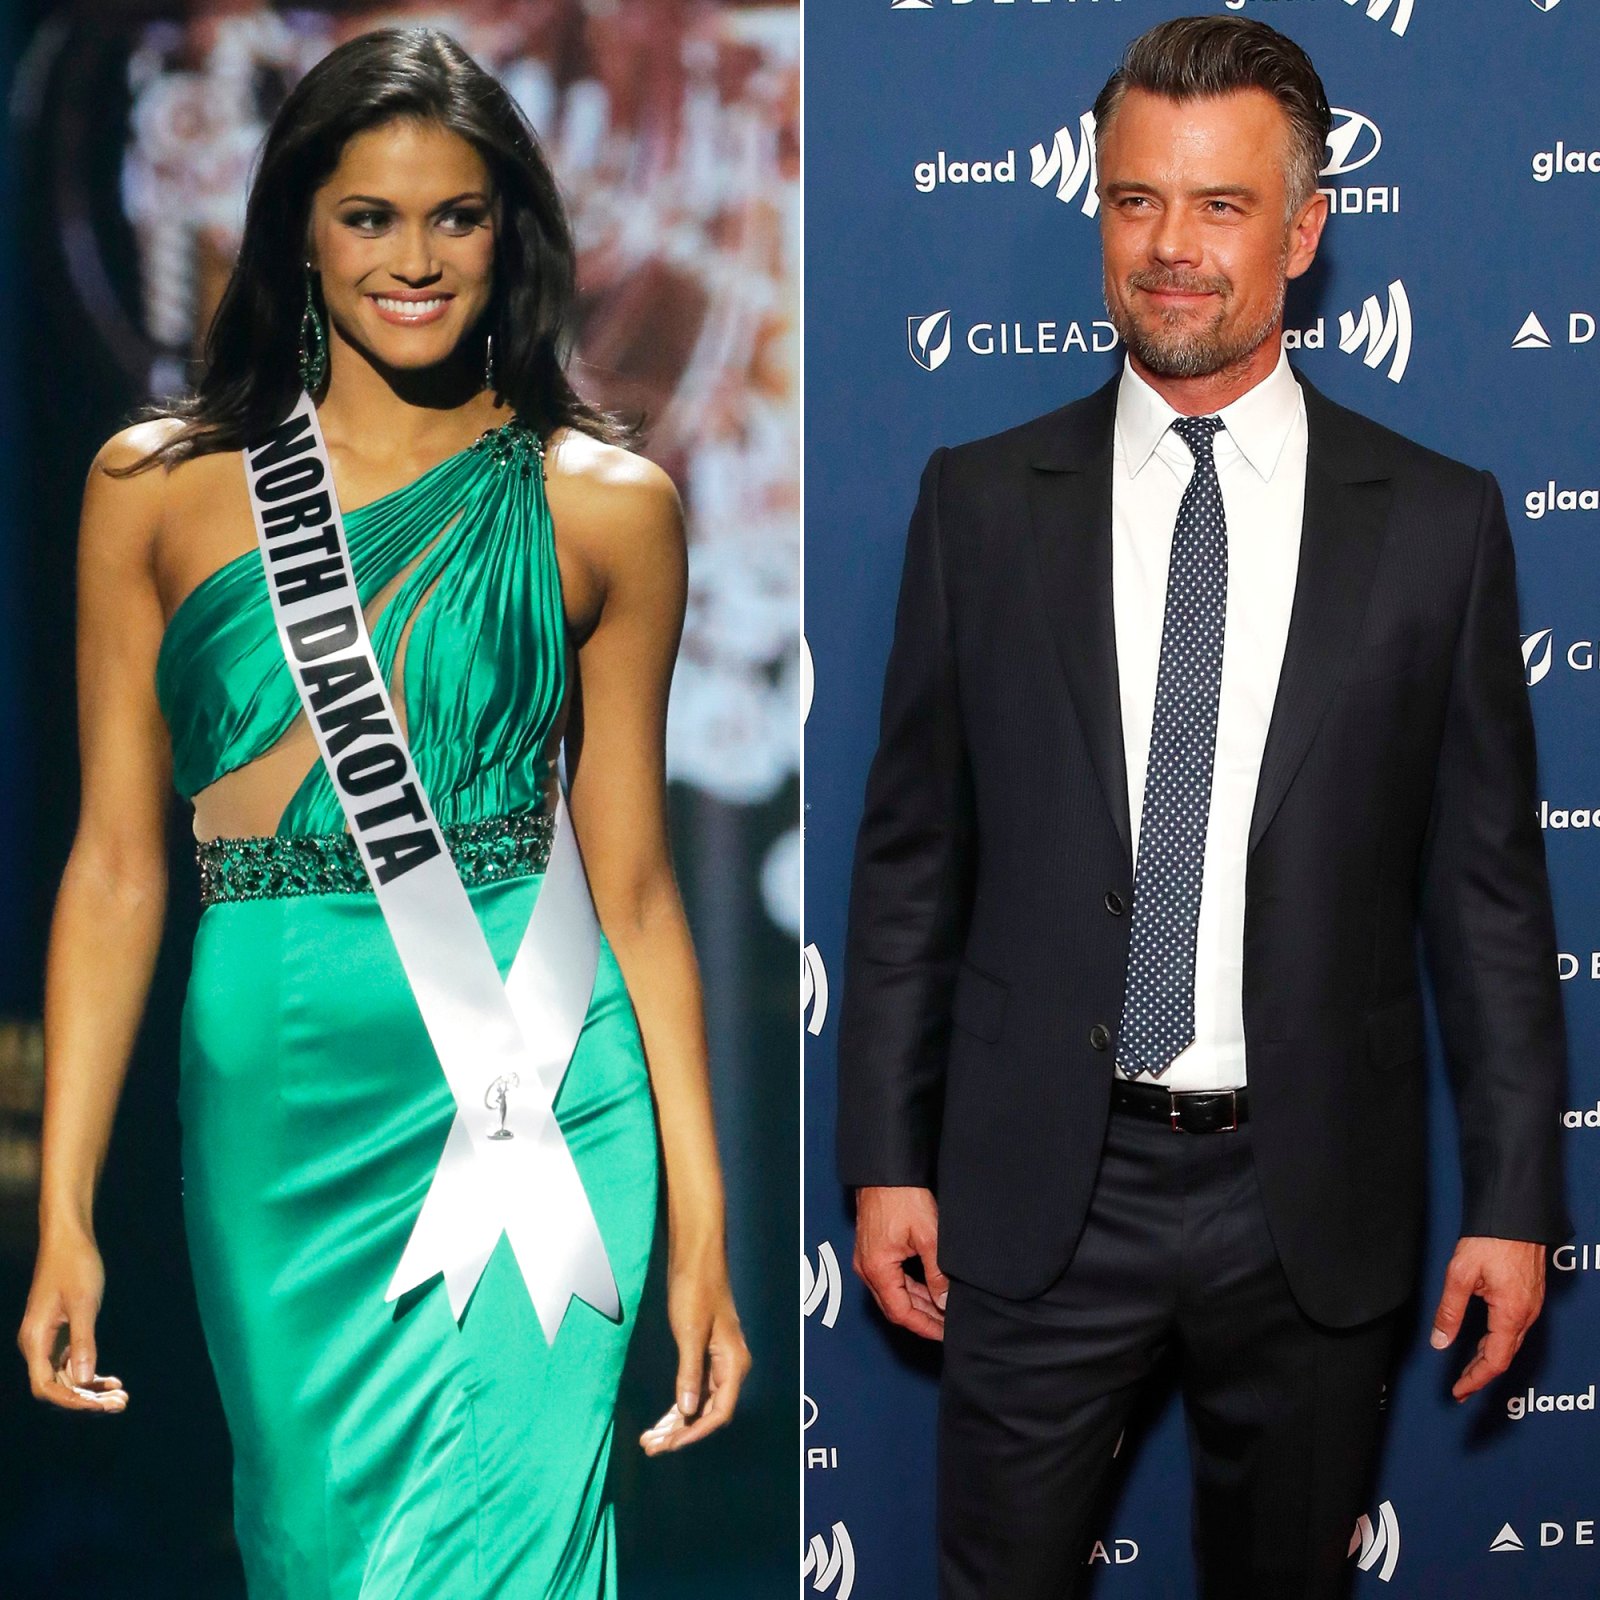 Josh Duhamel’s Girlfriend Audra Mari 5 Things to Know About Her